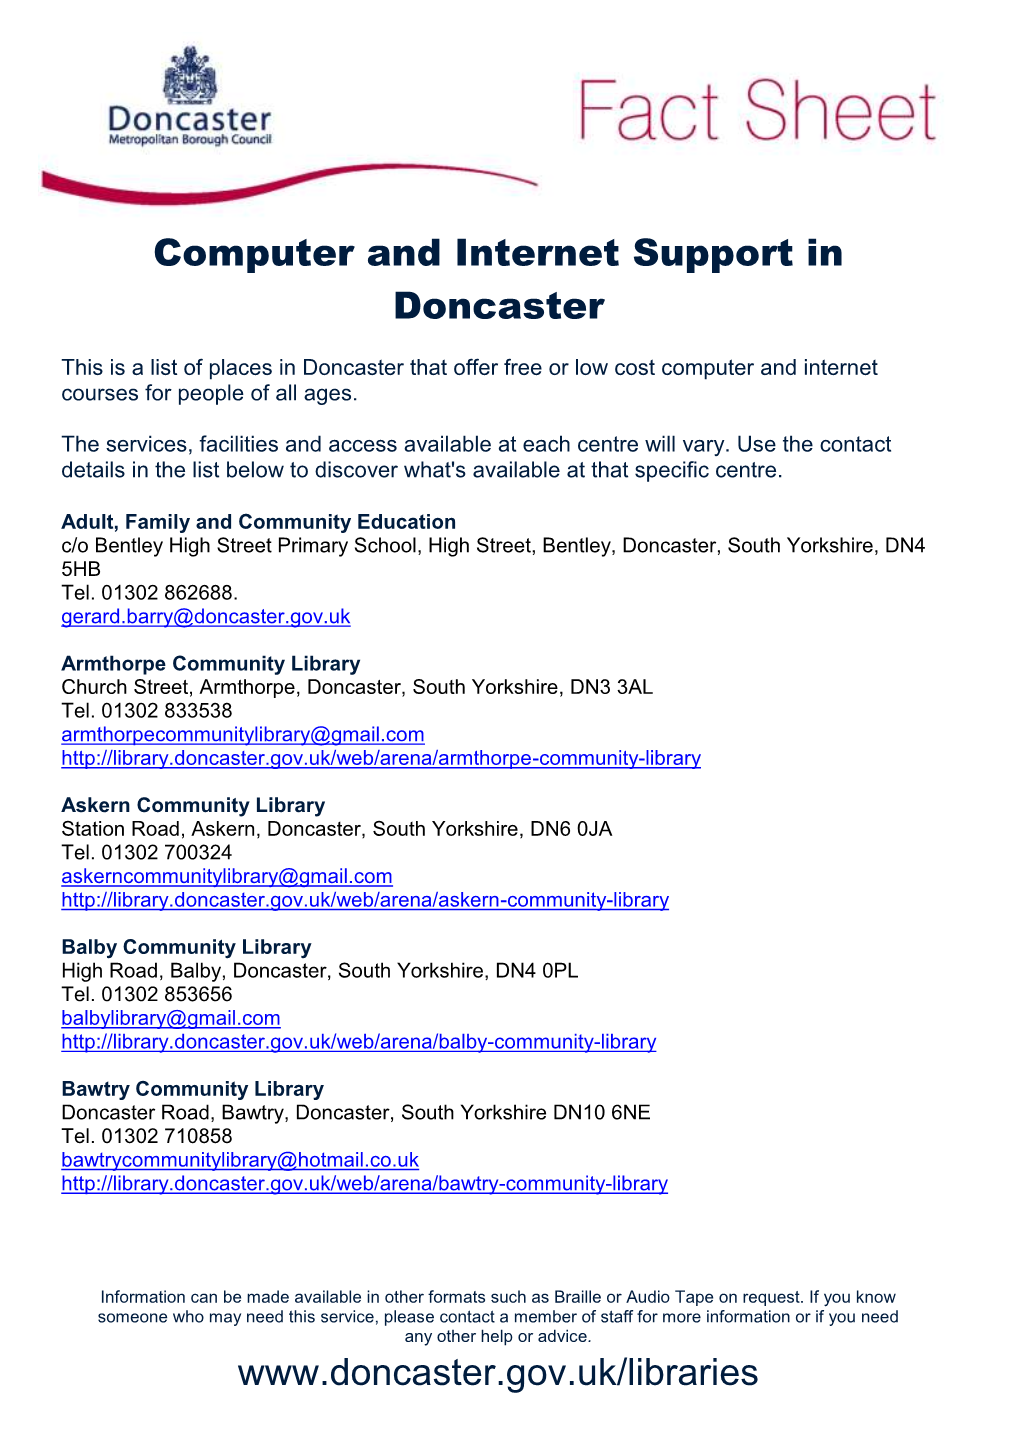 Computer and Internet Support in Doncaster